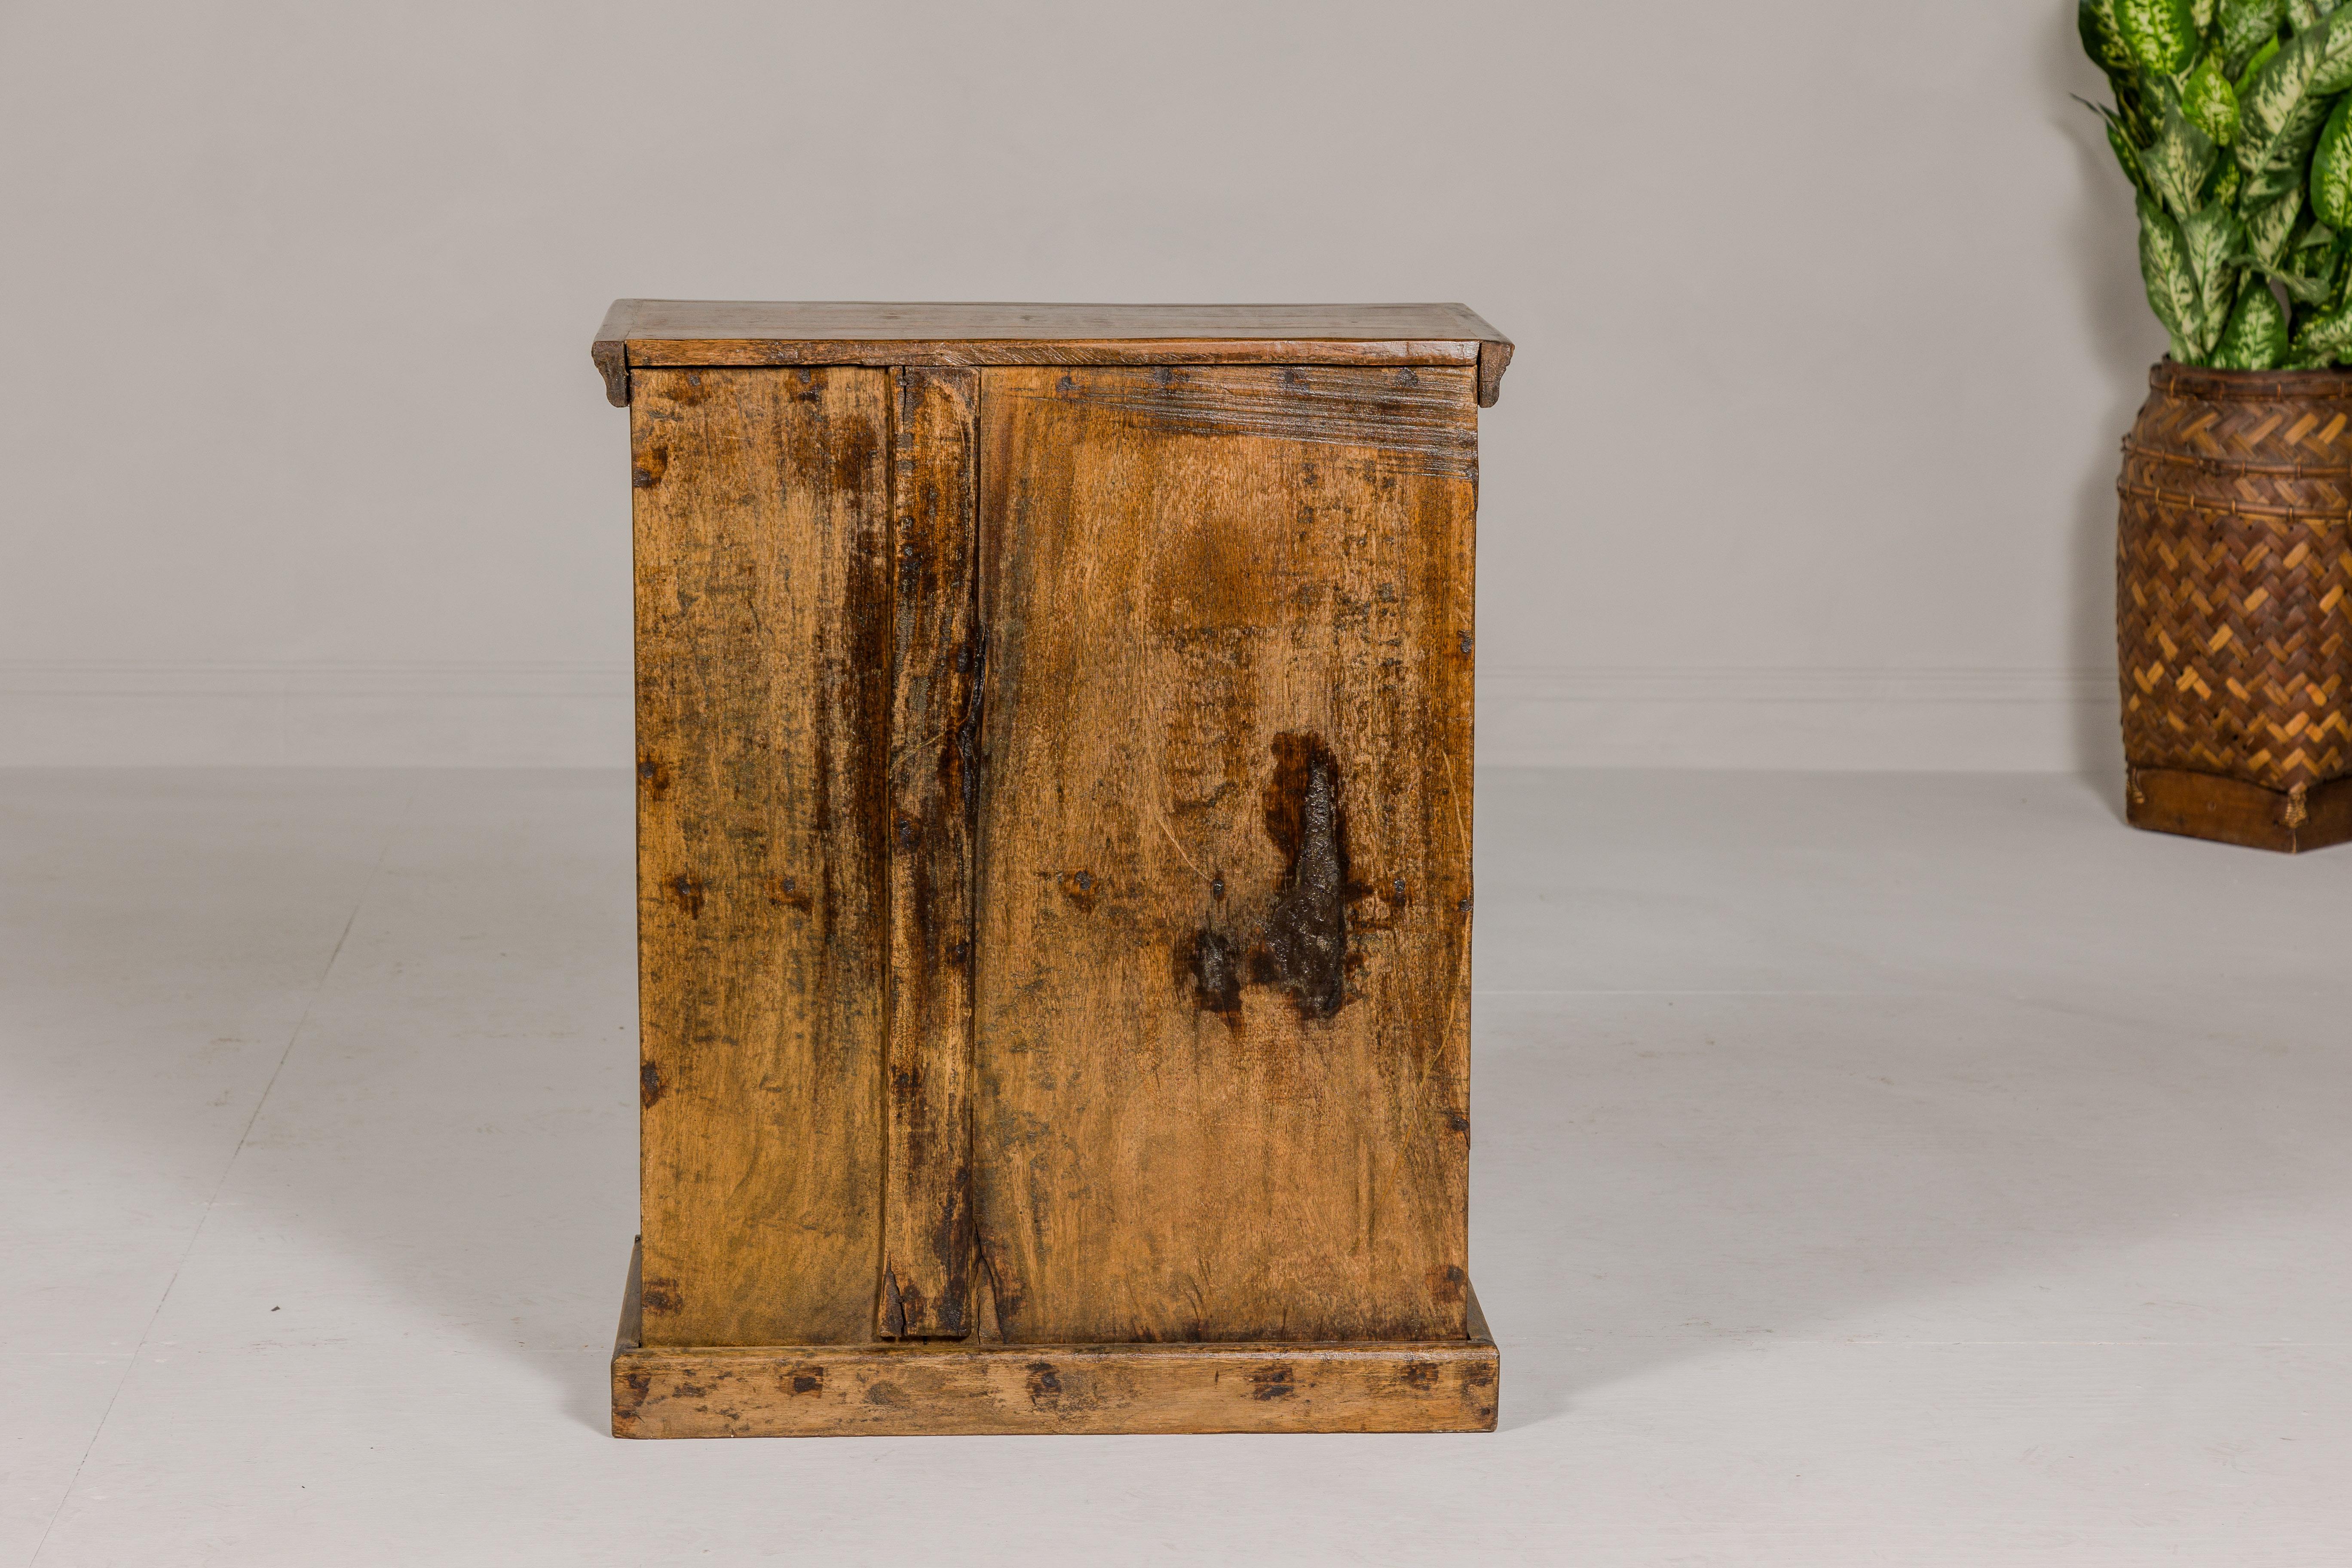 Indian 19th Century Wooden Side Cabinet with Arched Metal Grate Window Door For Sale 13